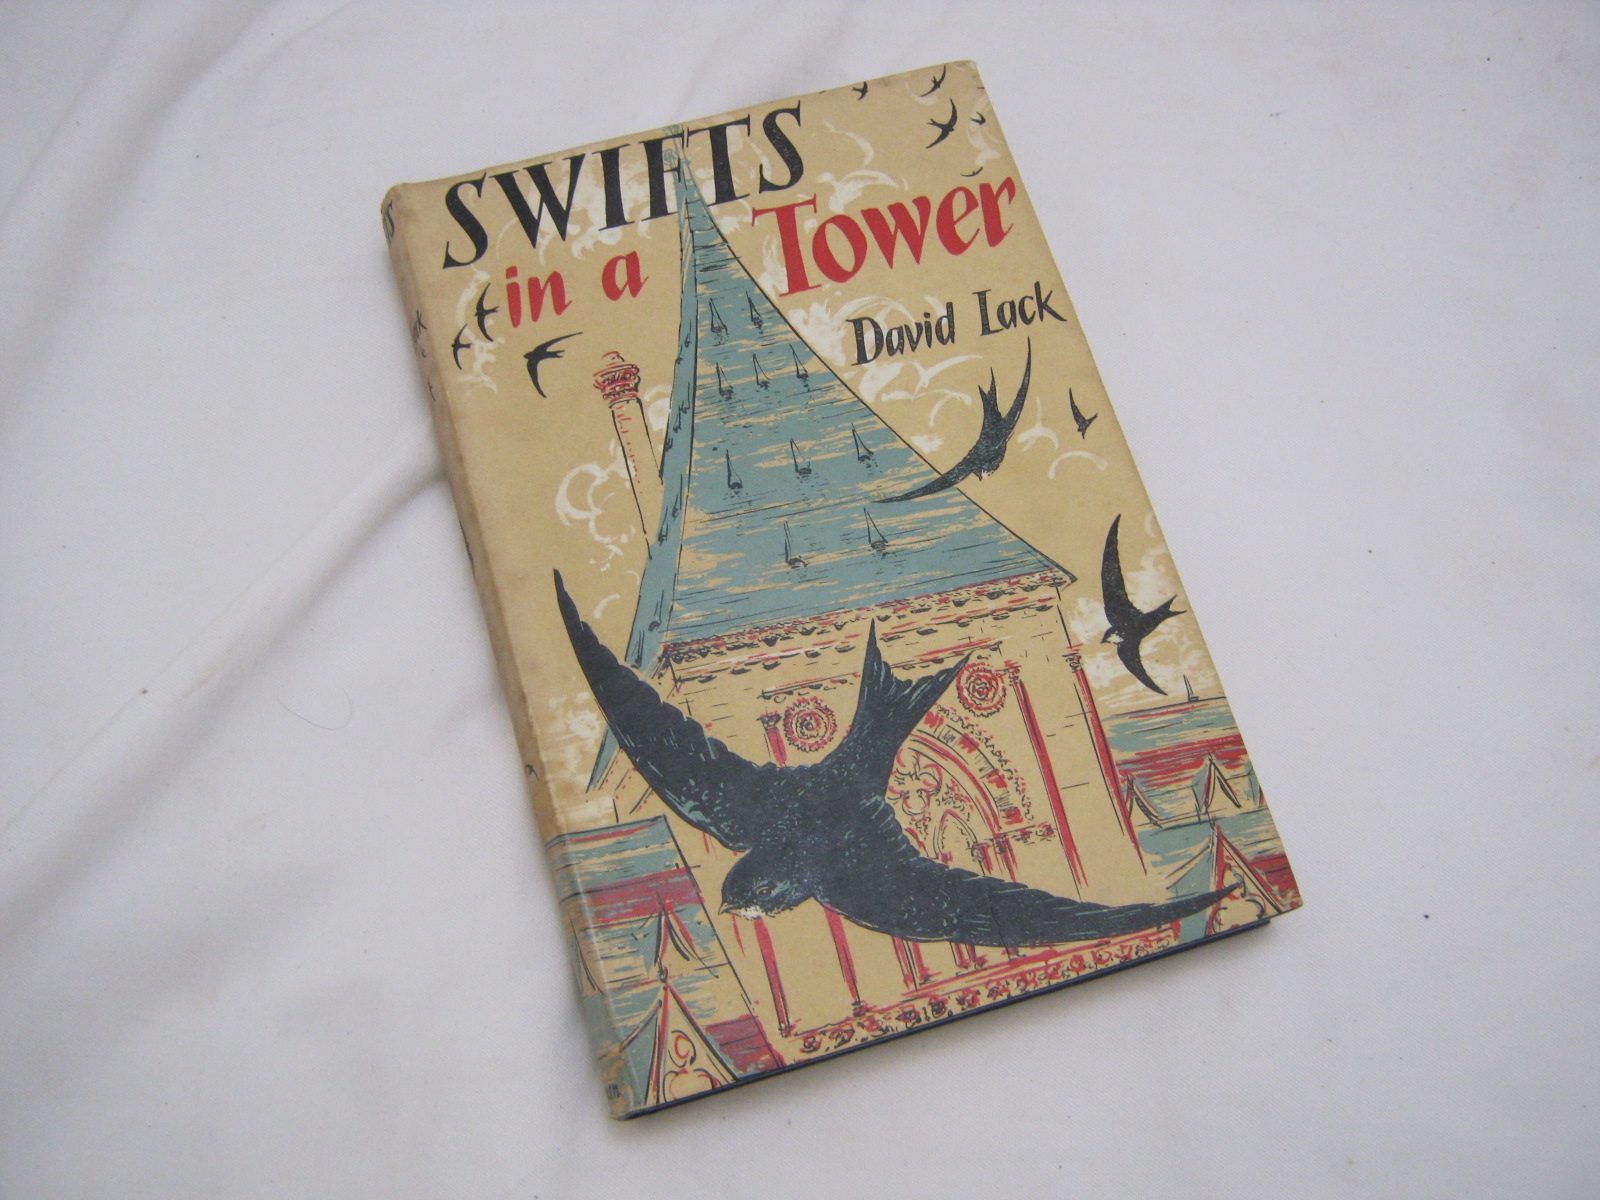 DAVID LACK: SWIFTS IN A TOWER, 1956 1st edn, orig cl d/w - Image 2 of 5